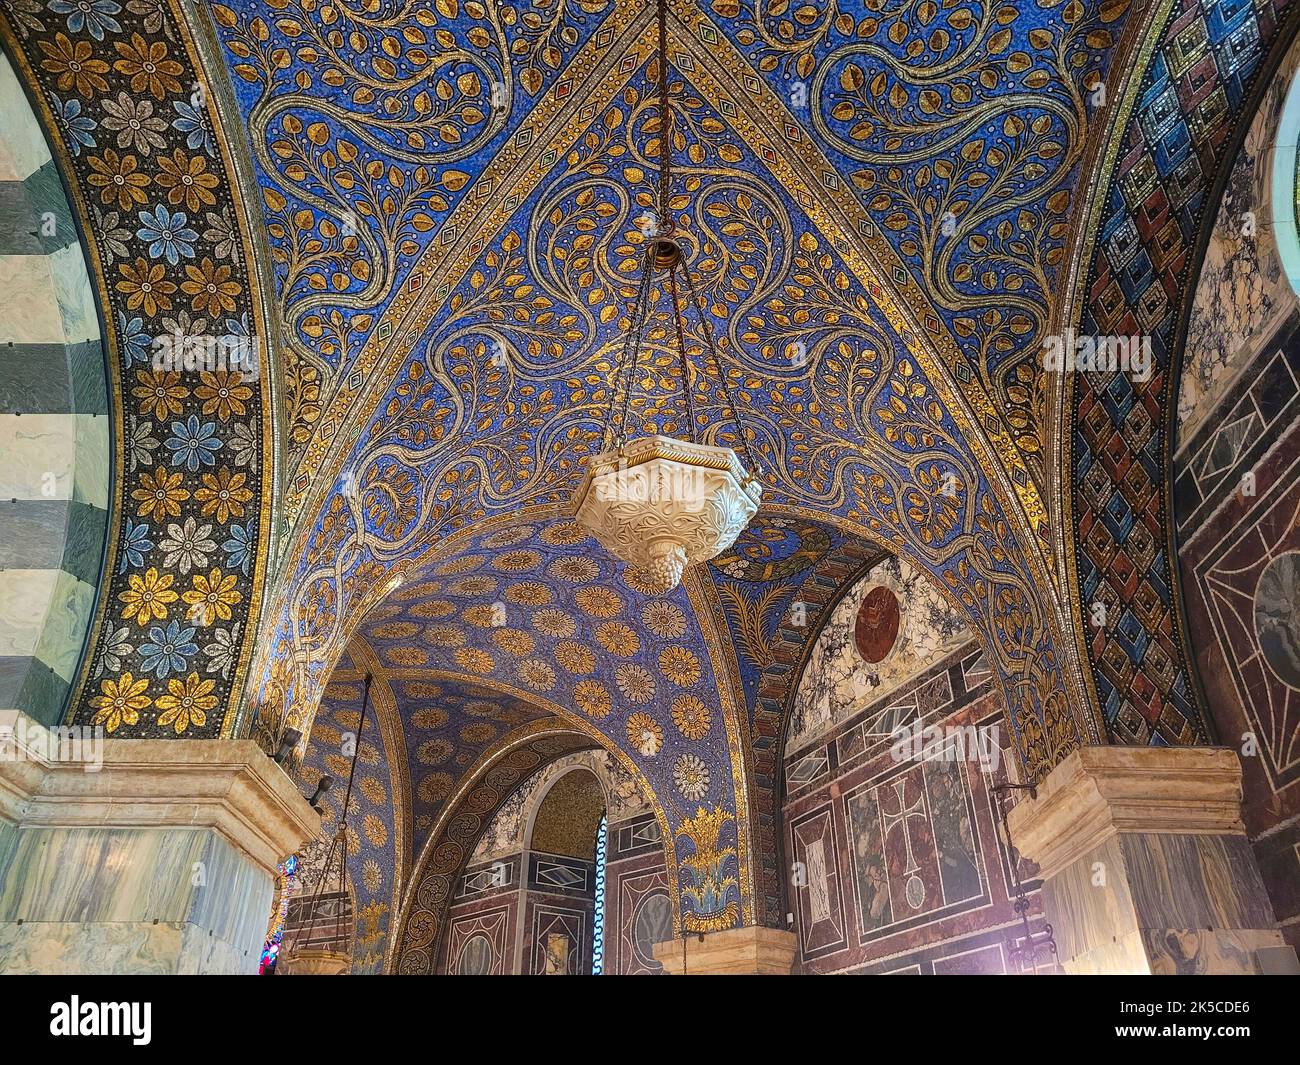 Ceiling vault in Aachen Cathedral, Aachen, North Rhine-Westphalia, Germany Stock Photo